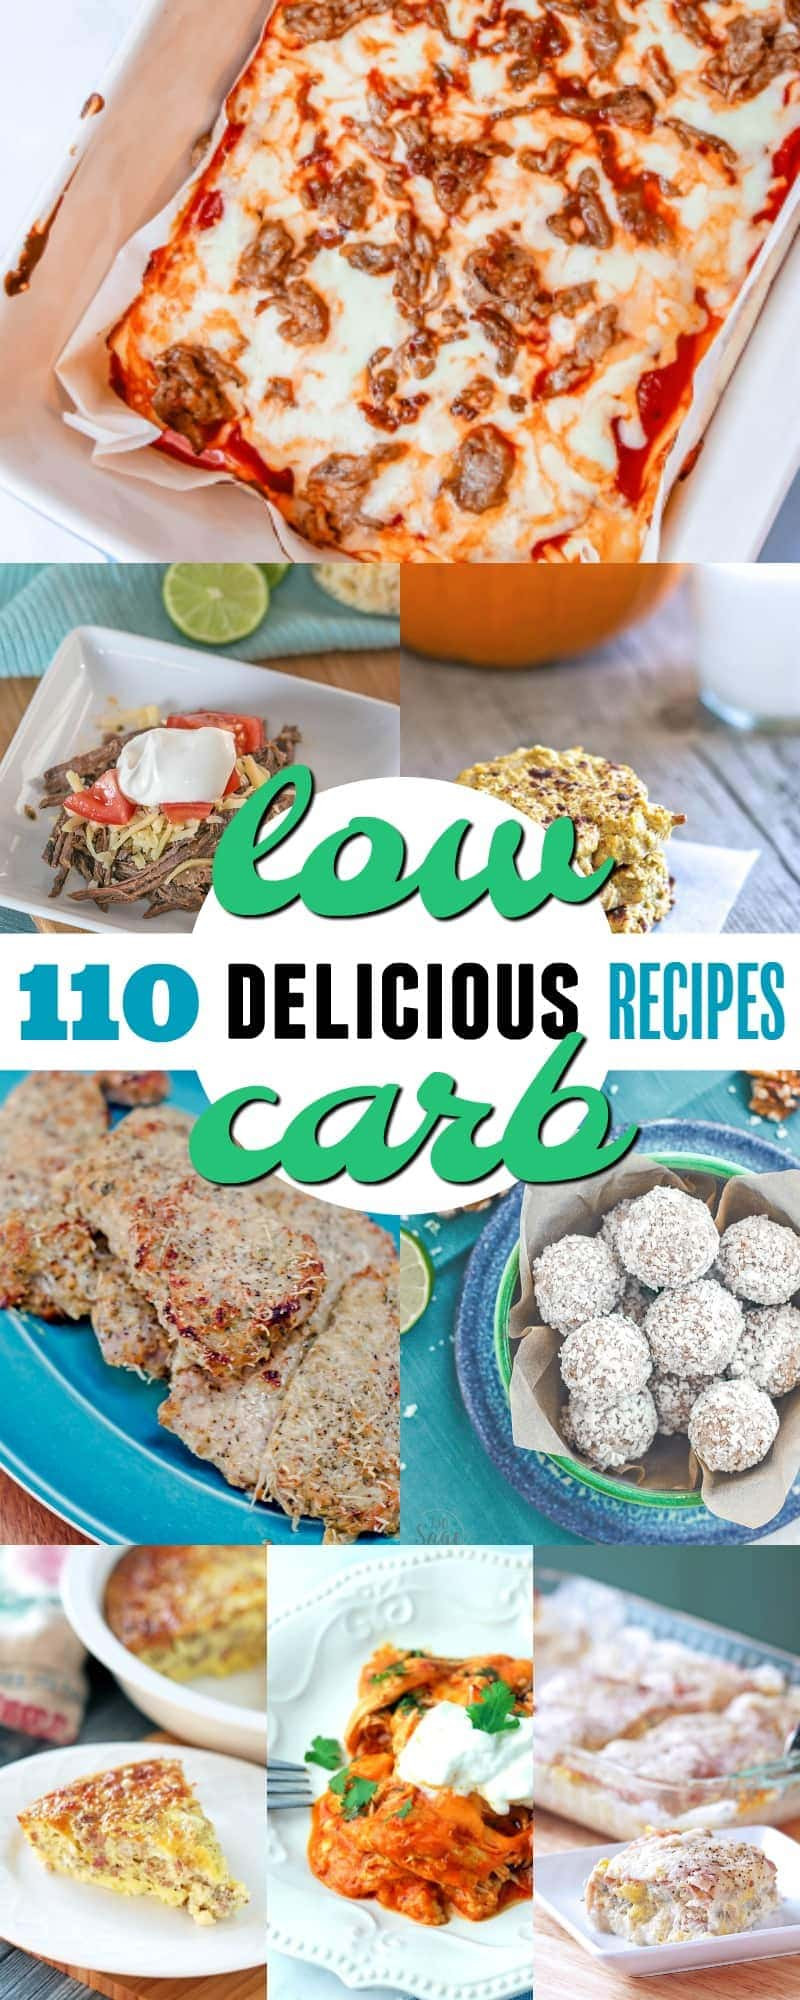 Low Carb Desserts Fast Food
 110 Delicious Low Carb Diet Recipes 730 Sage Street